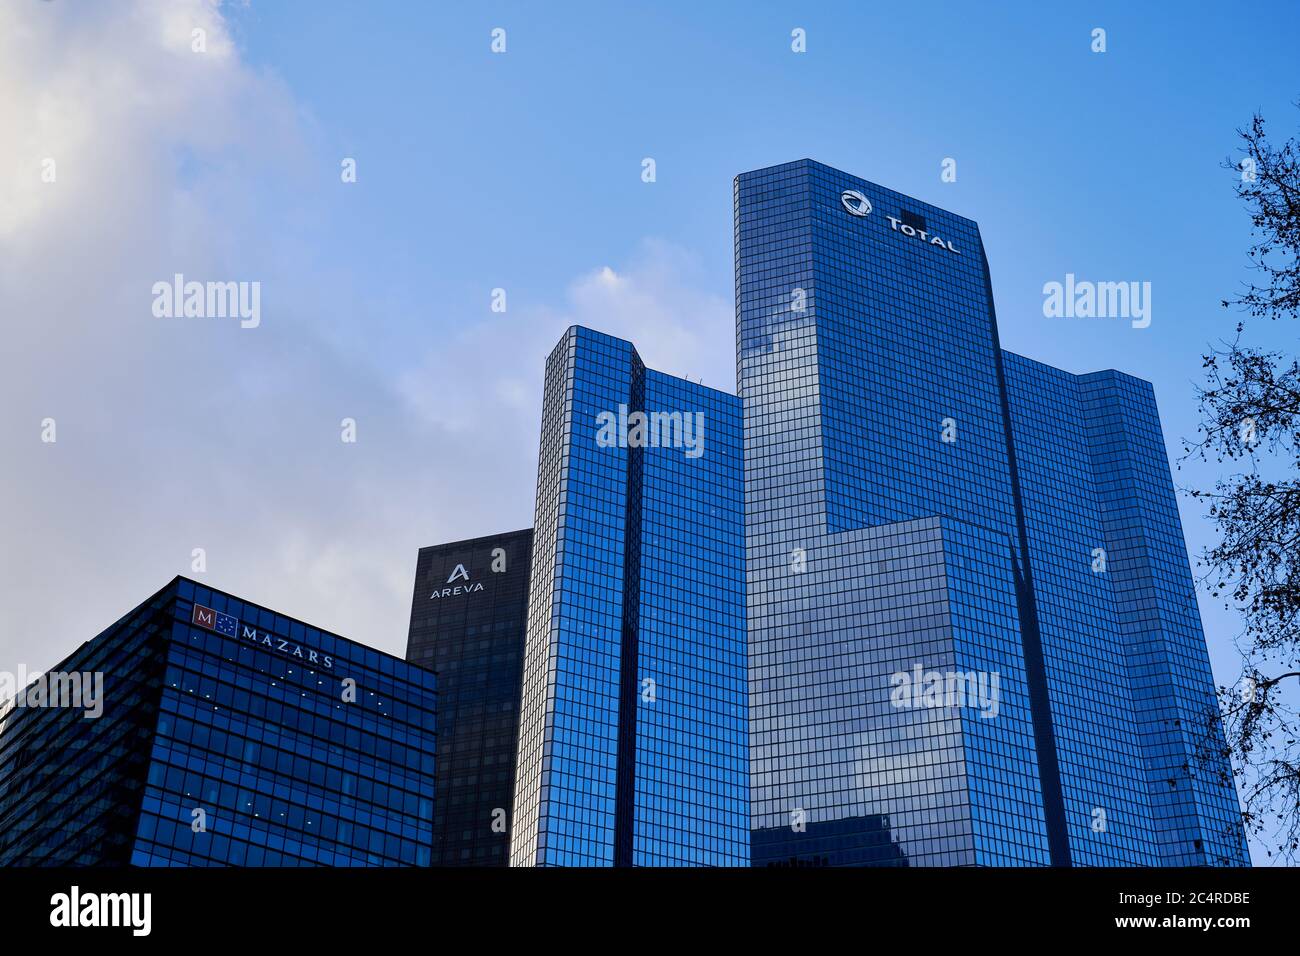 TOTAL headquarters, skyscrapers and office buildings in La Defense business district, Paris Stock Photo